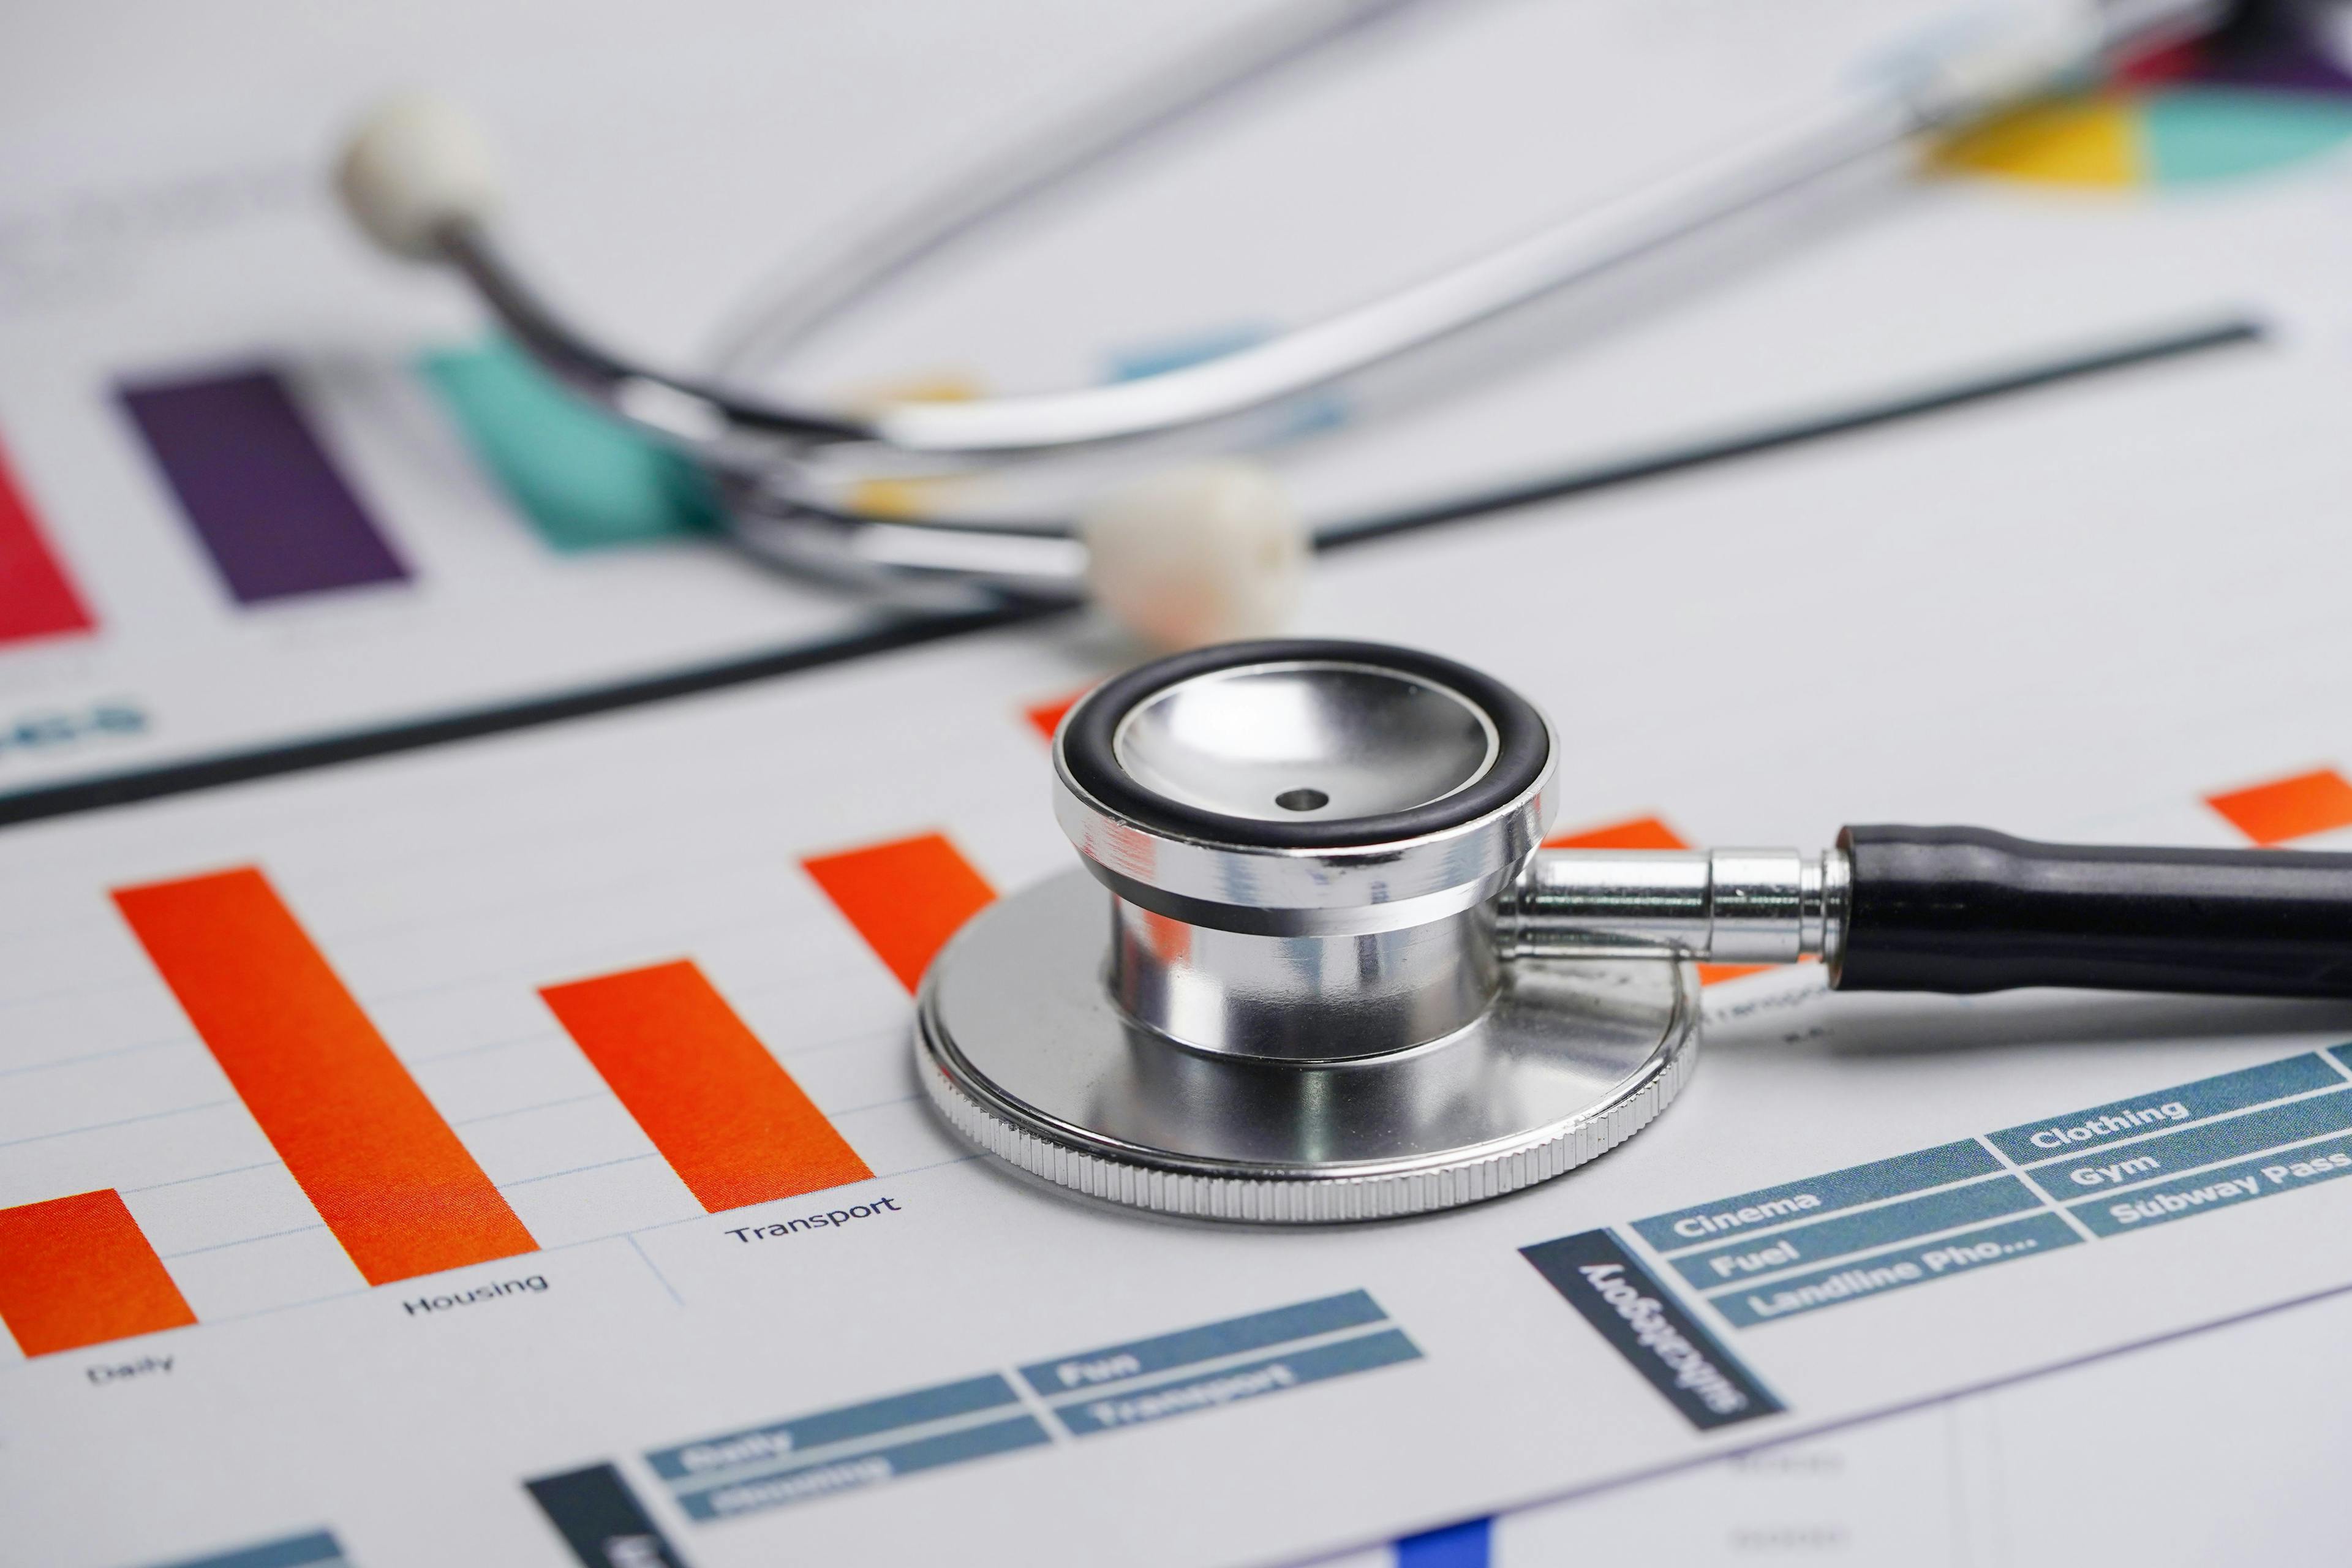 Health systems saw declines in both inpatient and outpatient revenue in July, according to the latest monthly report from Kaufman Hall. (Image credit: ©Amazing Studio - stock.adobe.com)